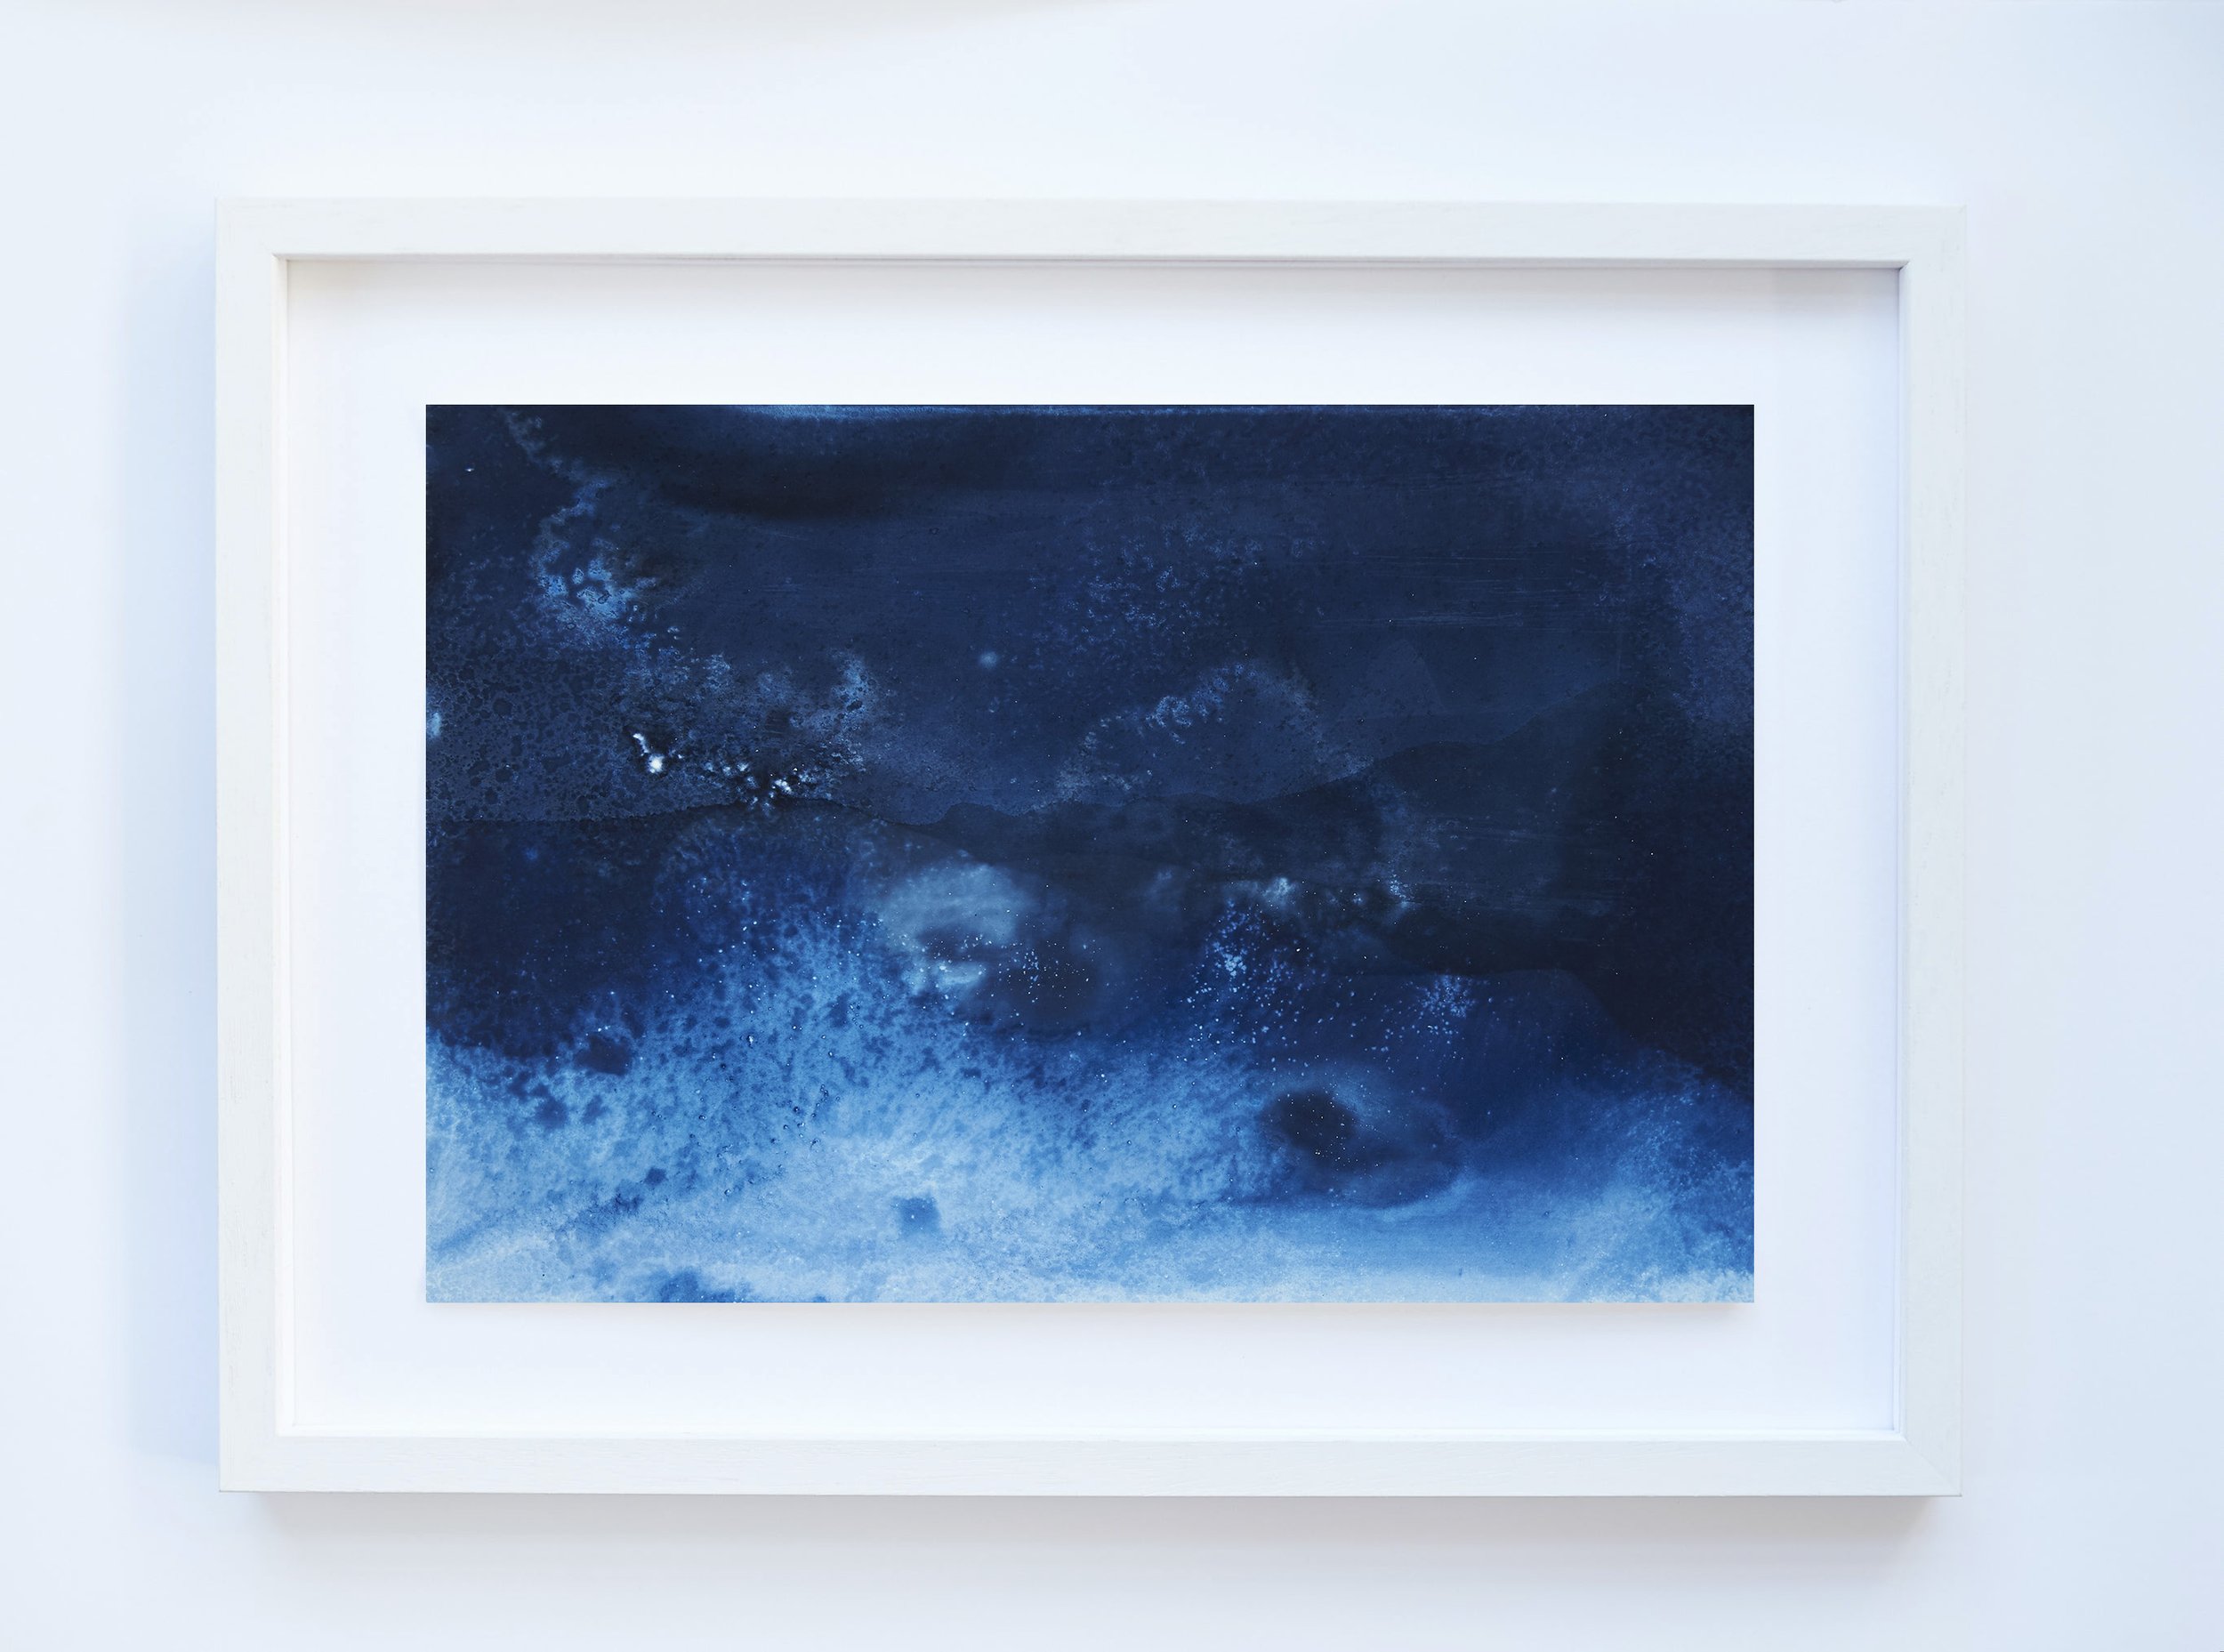  IL-Mainporth-2020-008 Cyanotype on paper  Print 12x18in  Framed 17x23in 